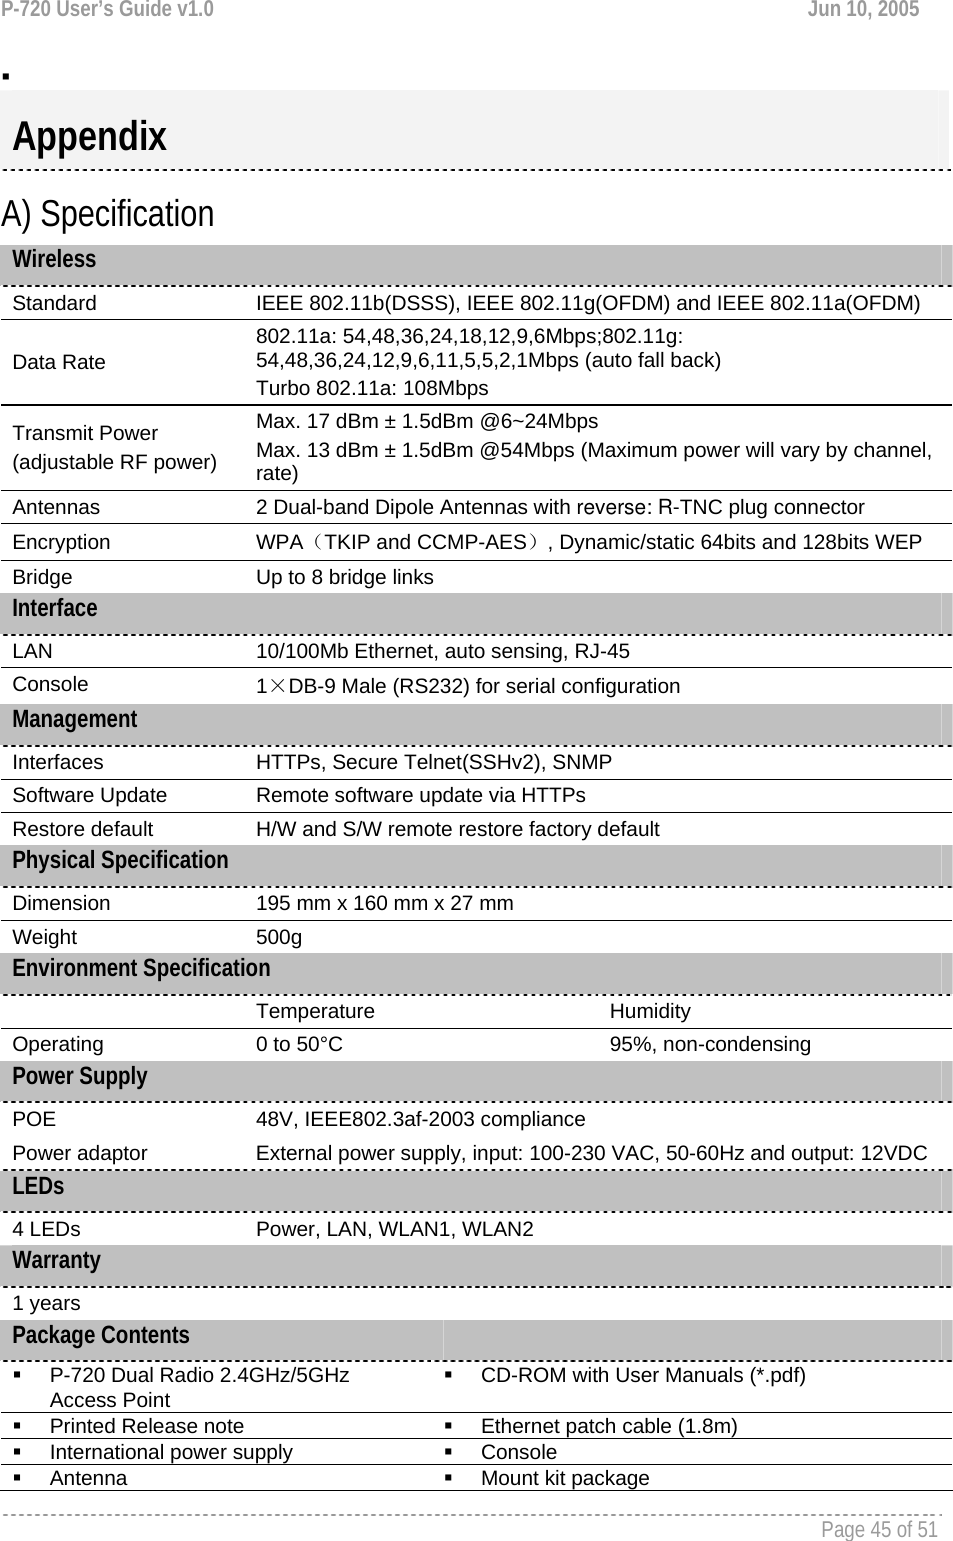 P-720 User’s Guide v1.0  Jun 10, 2005     Page 45 of 51     A) Specification Wireless Standard  IEEE 802.11b(DSSS), IEEE 802.11g(OFDM) and IEEE 802.11a(OFDM) Data Rate 802.11a: 54,48,36,24,18,12,9,6Mbps;802.11g: 54,48,36,24,12,9,6,11,5,5,2,1Mbps (auto fall back) Turbo 802.11a: 108Mbps Transmit Power (adjustable RF power) Max. 17 dBm ± 1.5dBm @6~24Mbps Max. 13 dBm ± 1.5dBm @54Mbps (Maximum power will vary by channel, rate) Antennas  2 Dual-band Dipole Antennas with reverse: R-TNC plug connector Encryption  WPA（TKIP and CCMP-AES）, Dynamic/static 64bits and 128bits WEP Bridge   Up to 8 bridge links Interface LAN  10/100Mb Ethernet, auto sensing, RJ-45 Console  1×DB-9 Male (RS232) for serial configuration Management Interfaces  HTTPs, Secure Telnet(SSHv2), SNMP Software Update  Remote software update via HTTPs Restore default  H/W and S/W remote restore factory default Physical Specification Dimension   195 mm x 160 mm x 27 mm  Weight  500g Environment Specification  Temperature  Humidity Operating  0 to 50°C  95%, non-condensing Power Supply POE  48V, IEEE802.3af-2003 compliance Power adaptor  External power supply, input: 100-230 VAC, 50-60Hz and output: 12VDC LEDs 4 LEDs  Power, LAN, WLAN1, WLAN2   Warranty 1 years Package Contents     P-720 Dual Radio 2.4GHz/5GHz Access Point   CD-ROM with User Manuals (*.pdf)   Printed Release note    Ethernet patch cable (1.8m)   International power supply   Console  Antenna    Mount kit package Appendix 